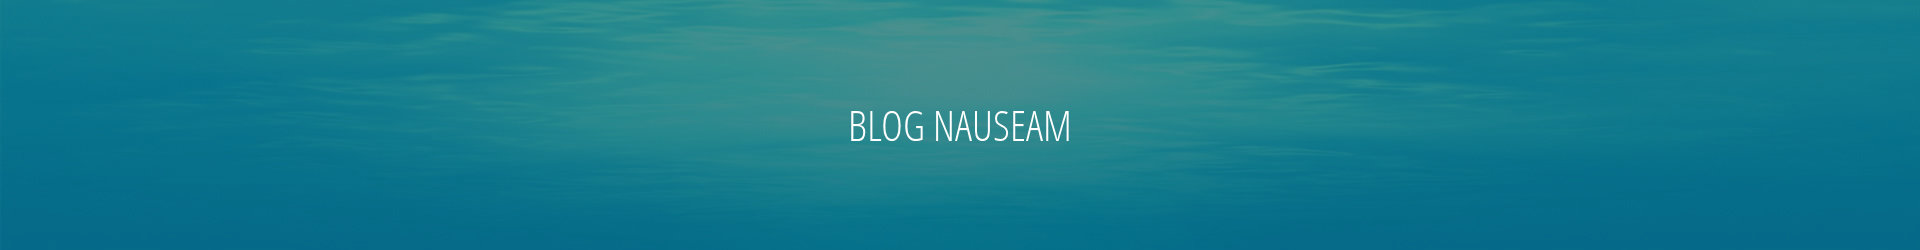 What’s changed at blog nauseam and why